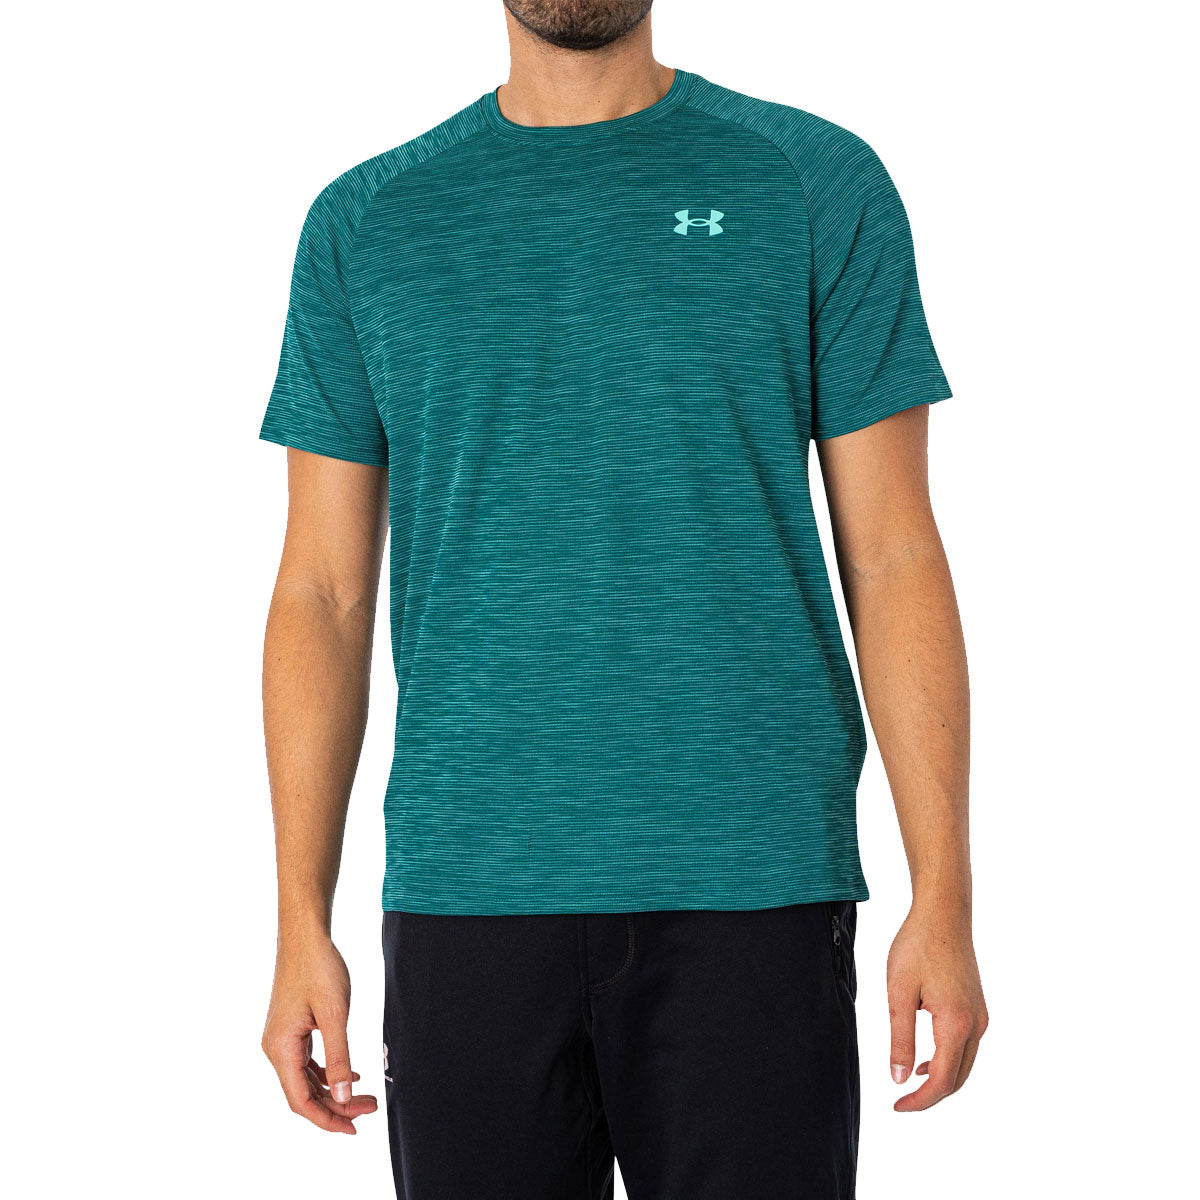 Under Armour Tech Textured Short Sleeve Tee - Mens - Hydro Teal/Radial Turquoise